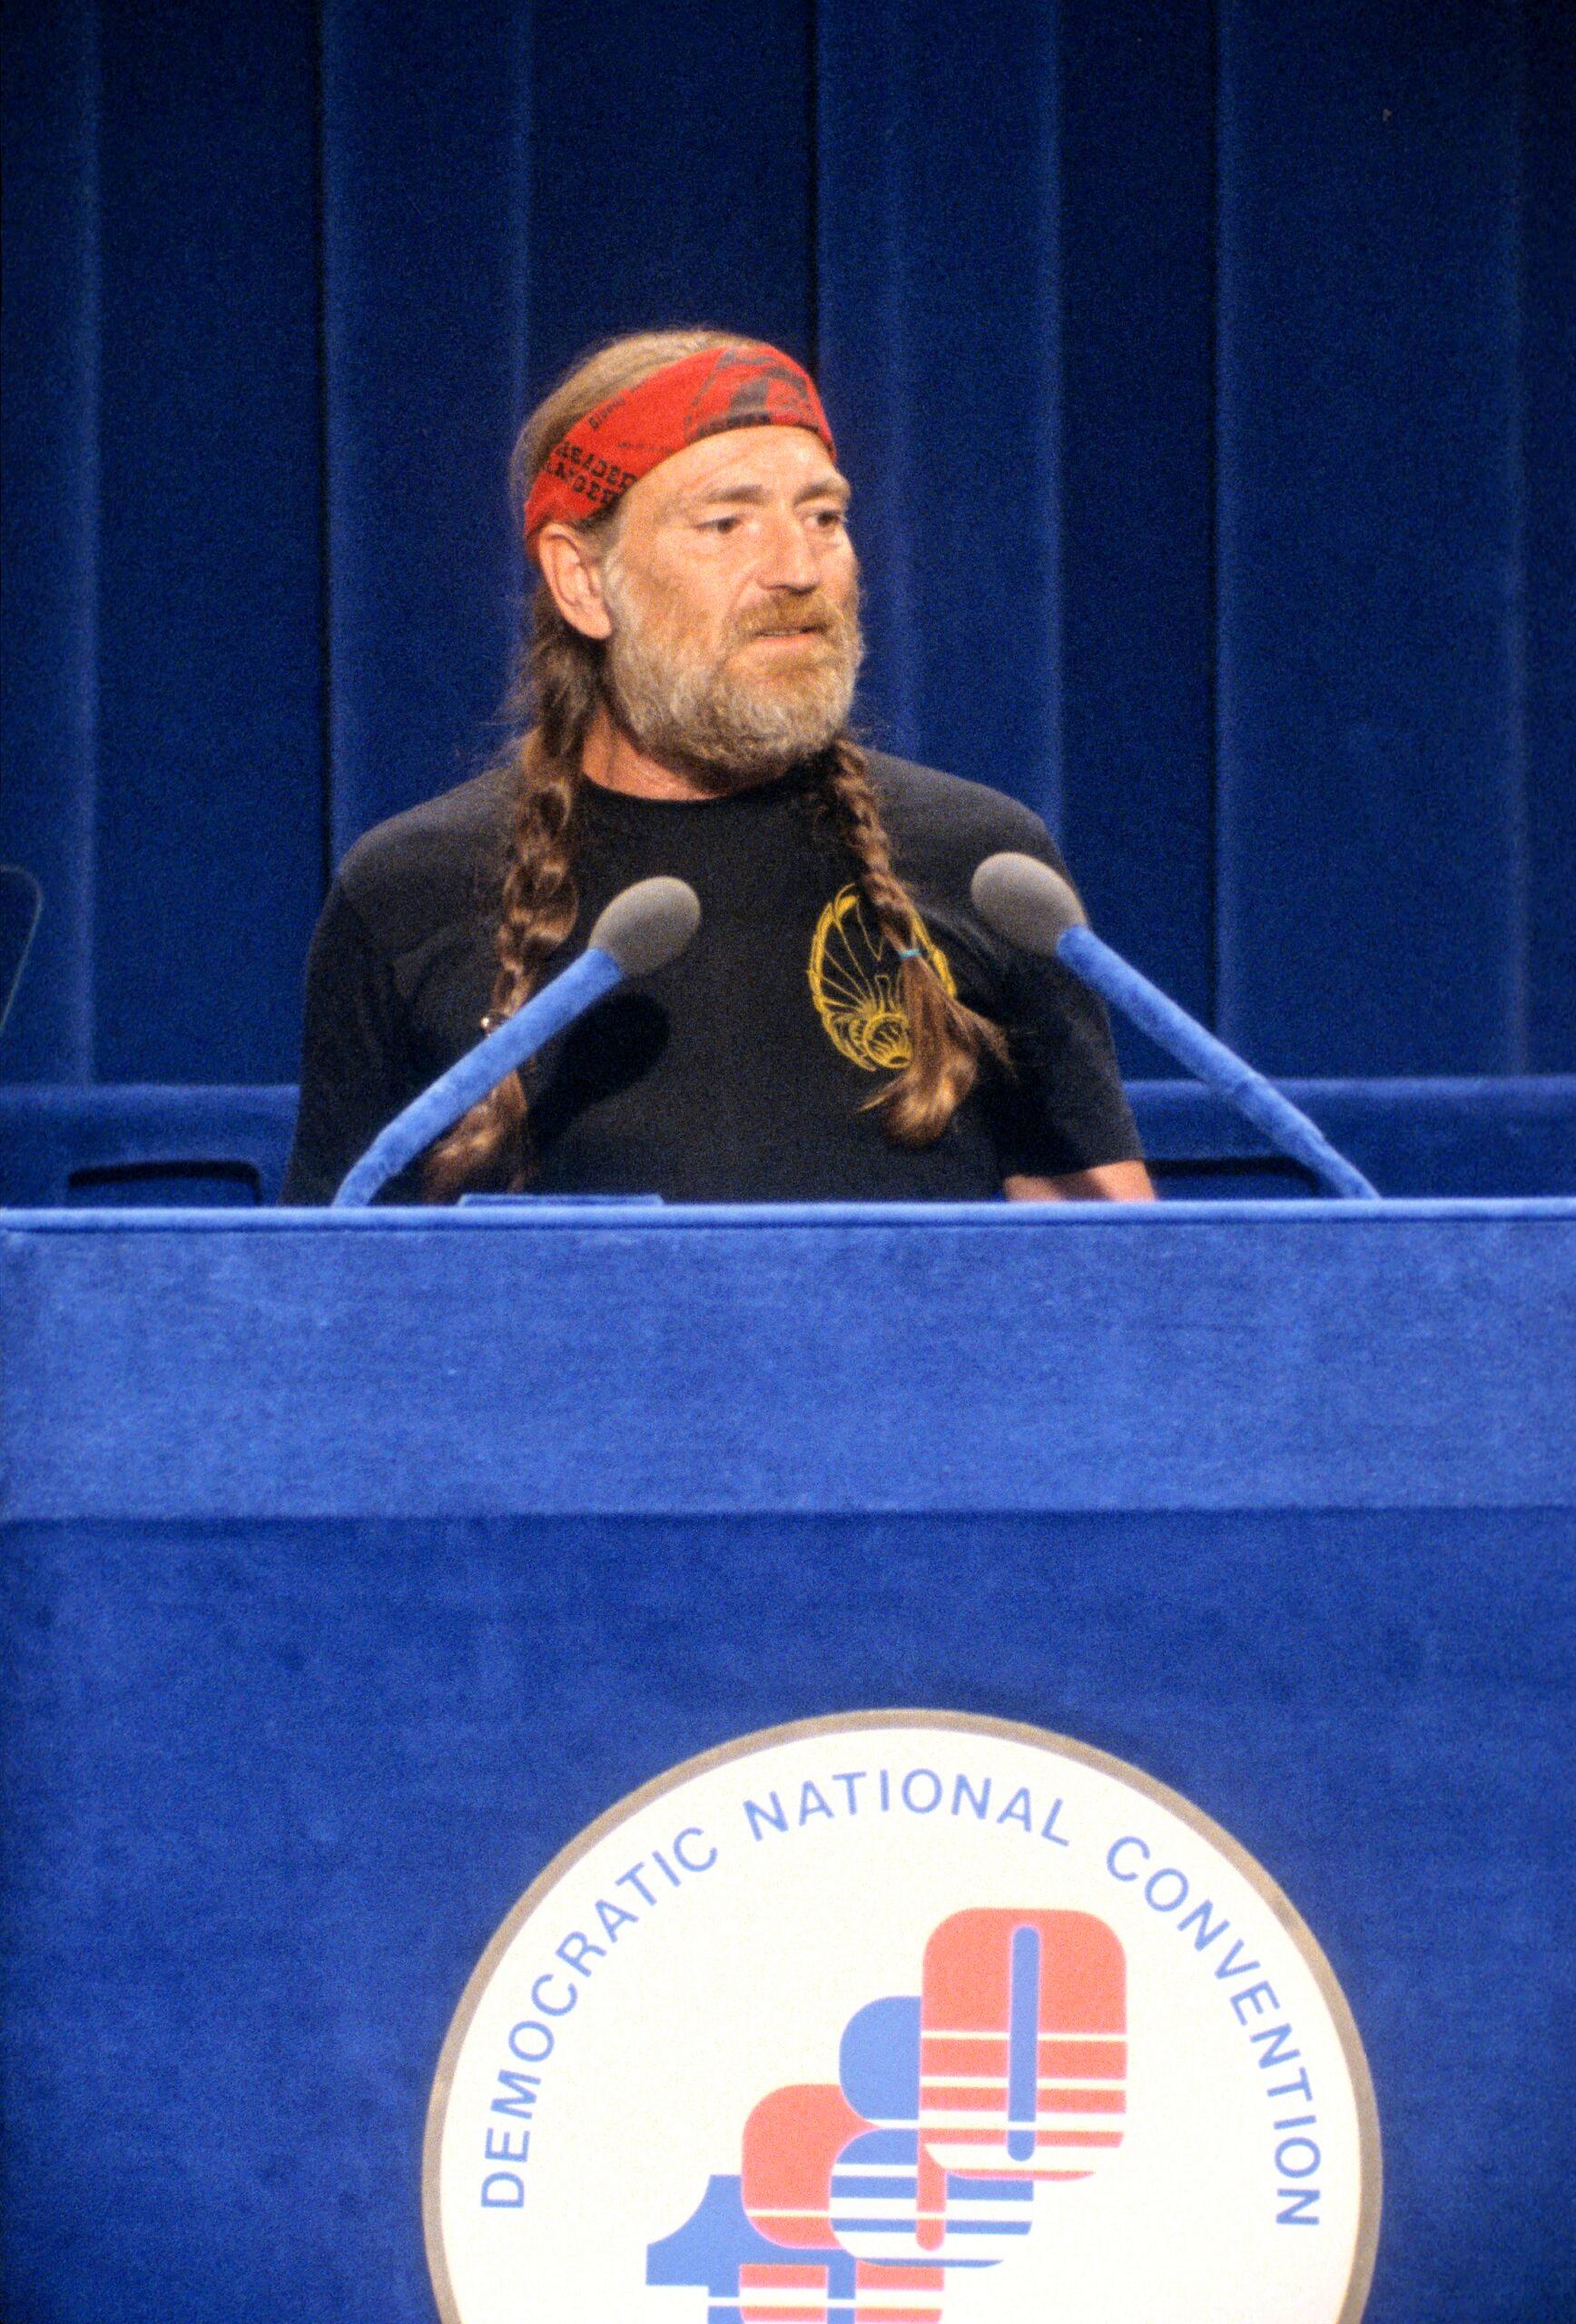 Willie Nelson Speaks at 1980 Democratic Convention